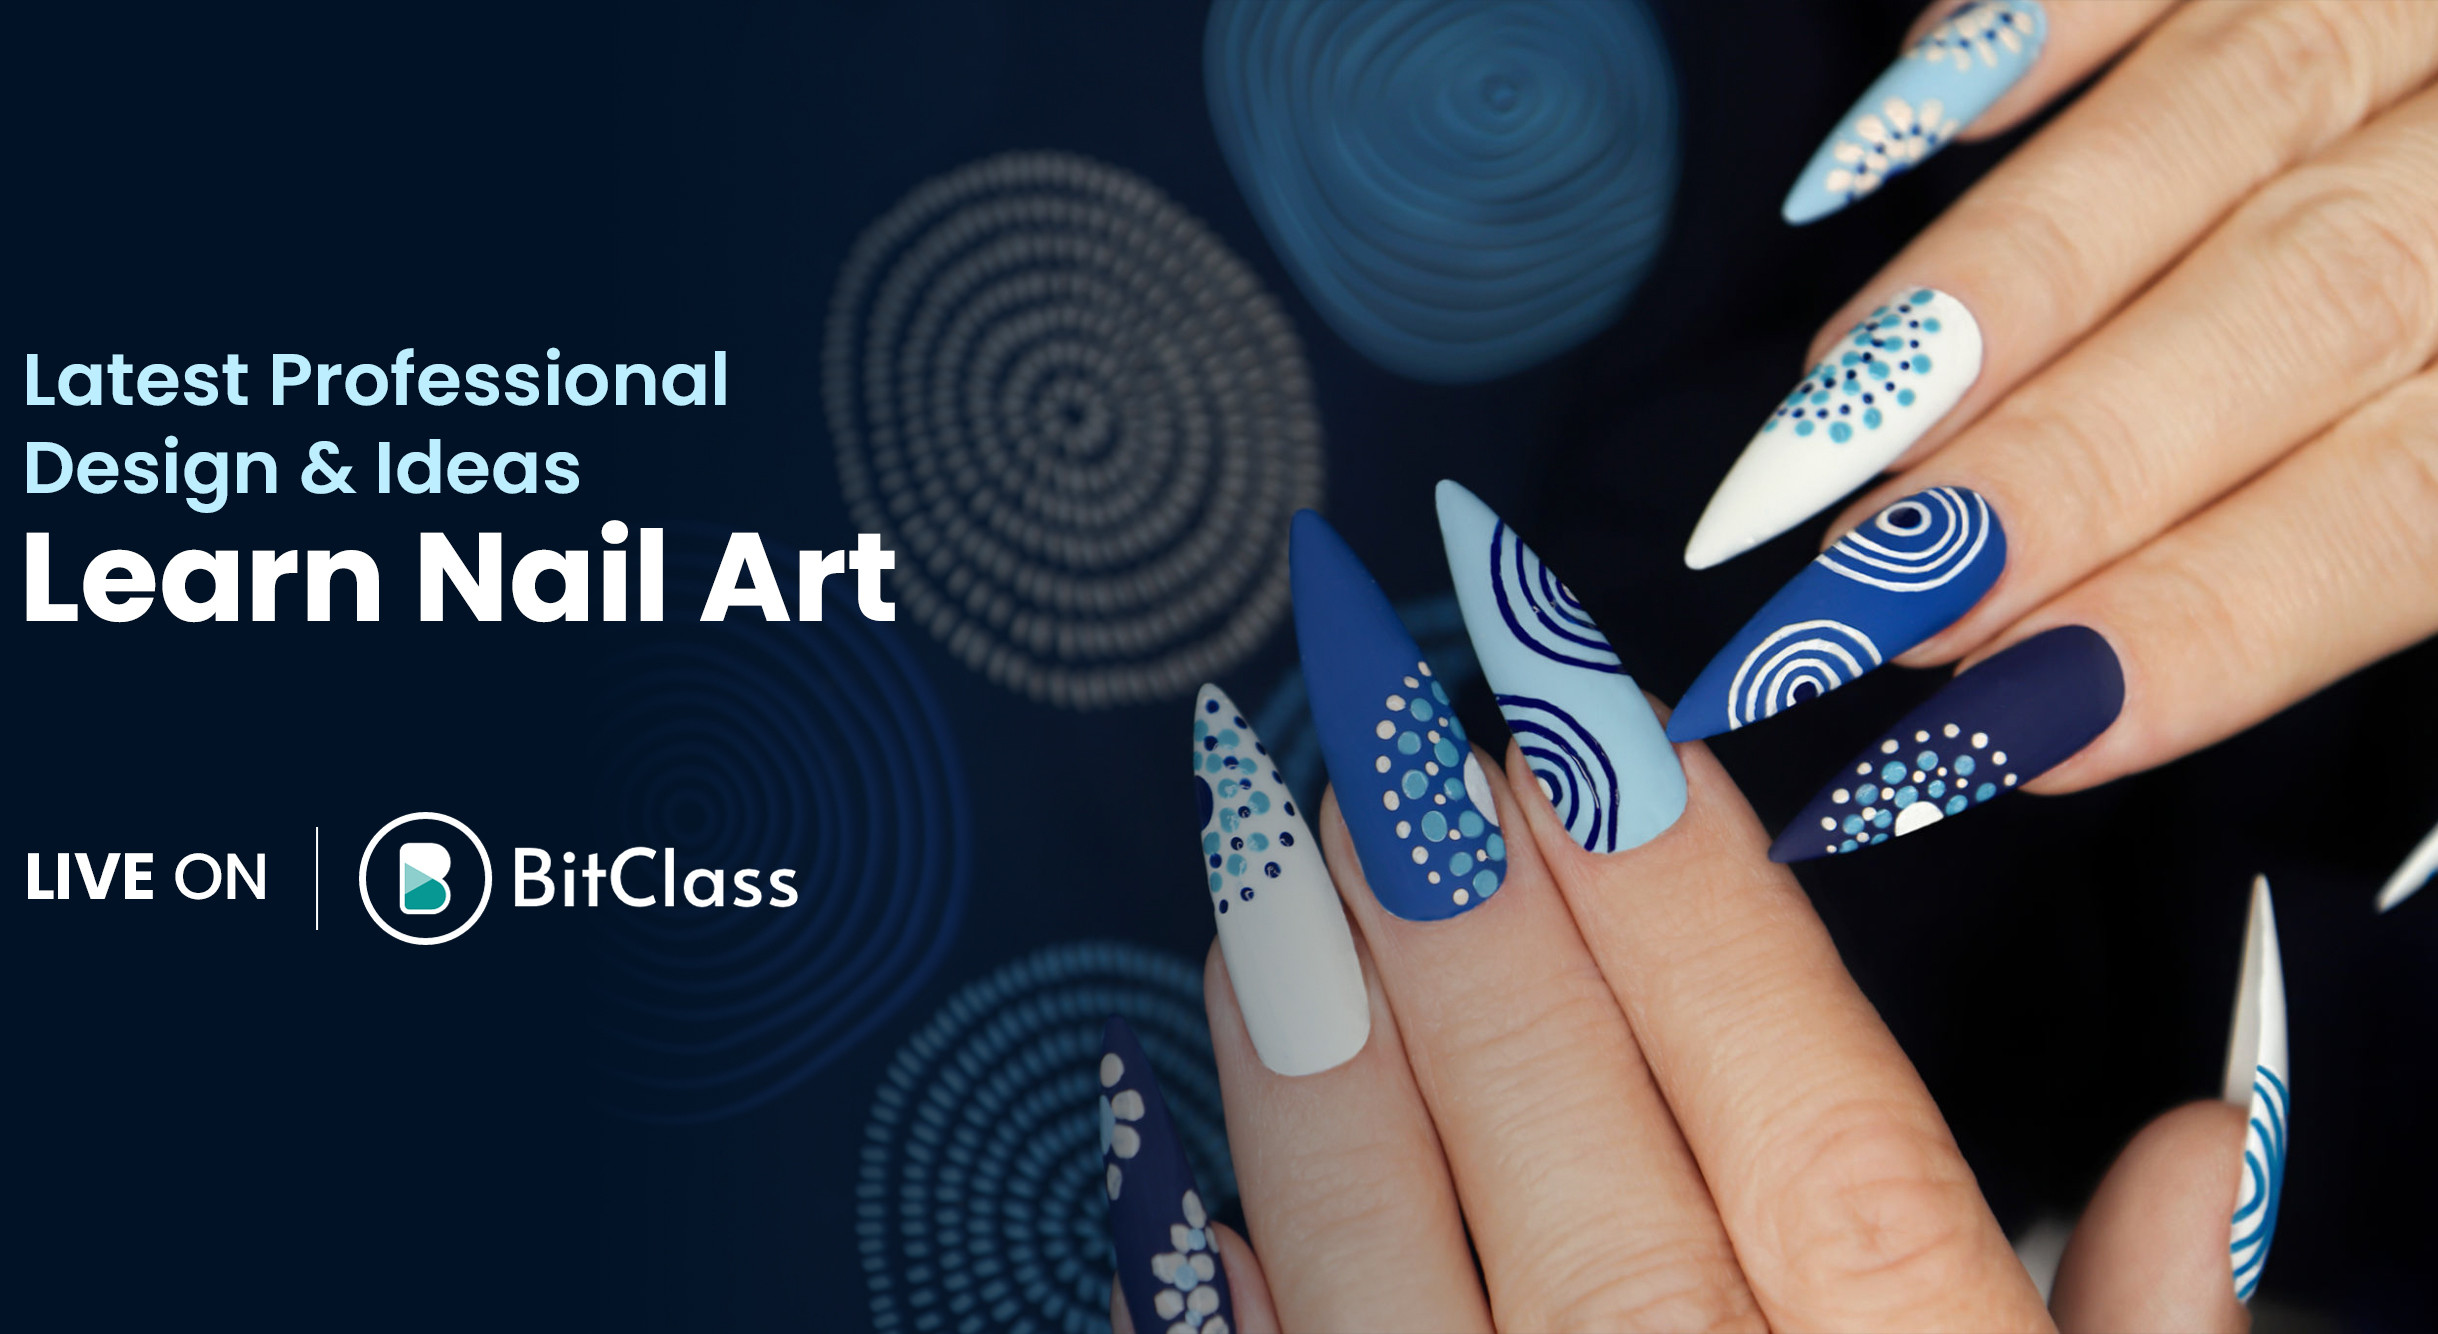 Be a Professional Nail Artist with Nail Art Course - O2 Nails India